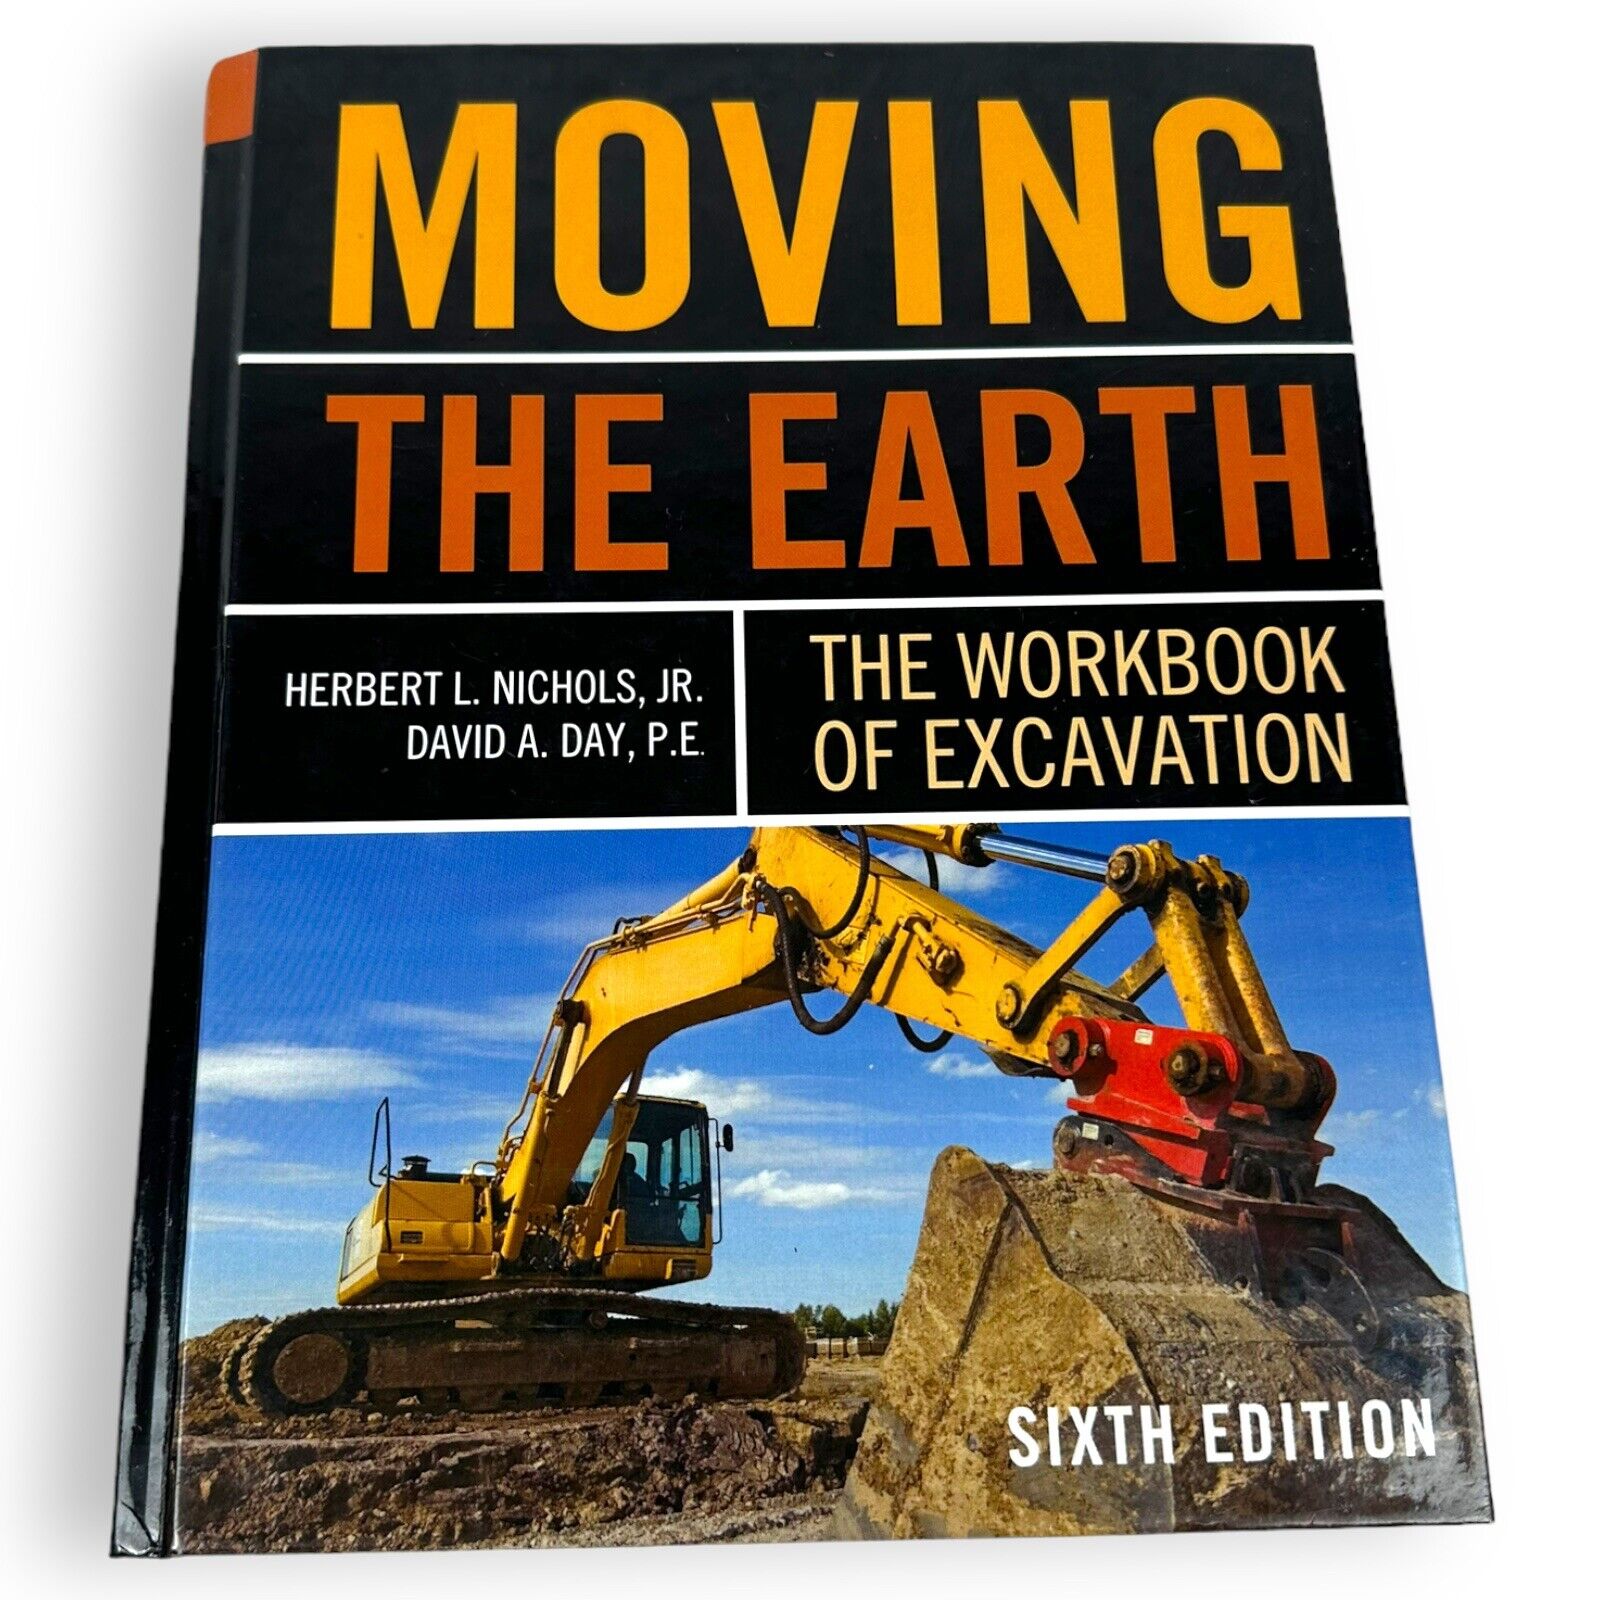 Moving The Earth: The Workbook of Excavation, 6th Edition